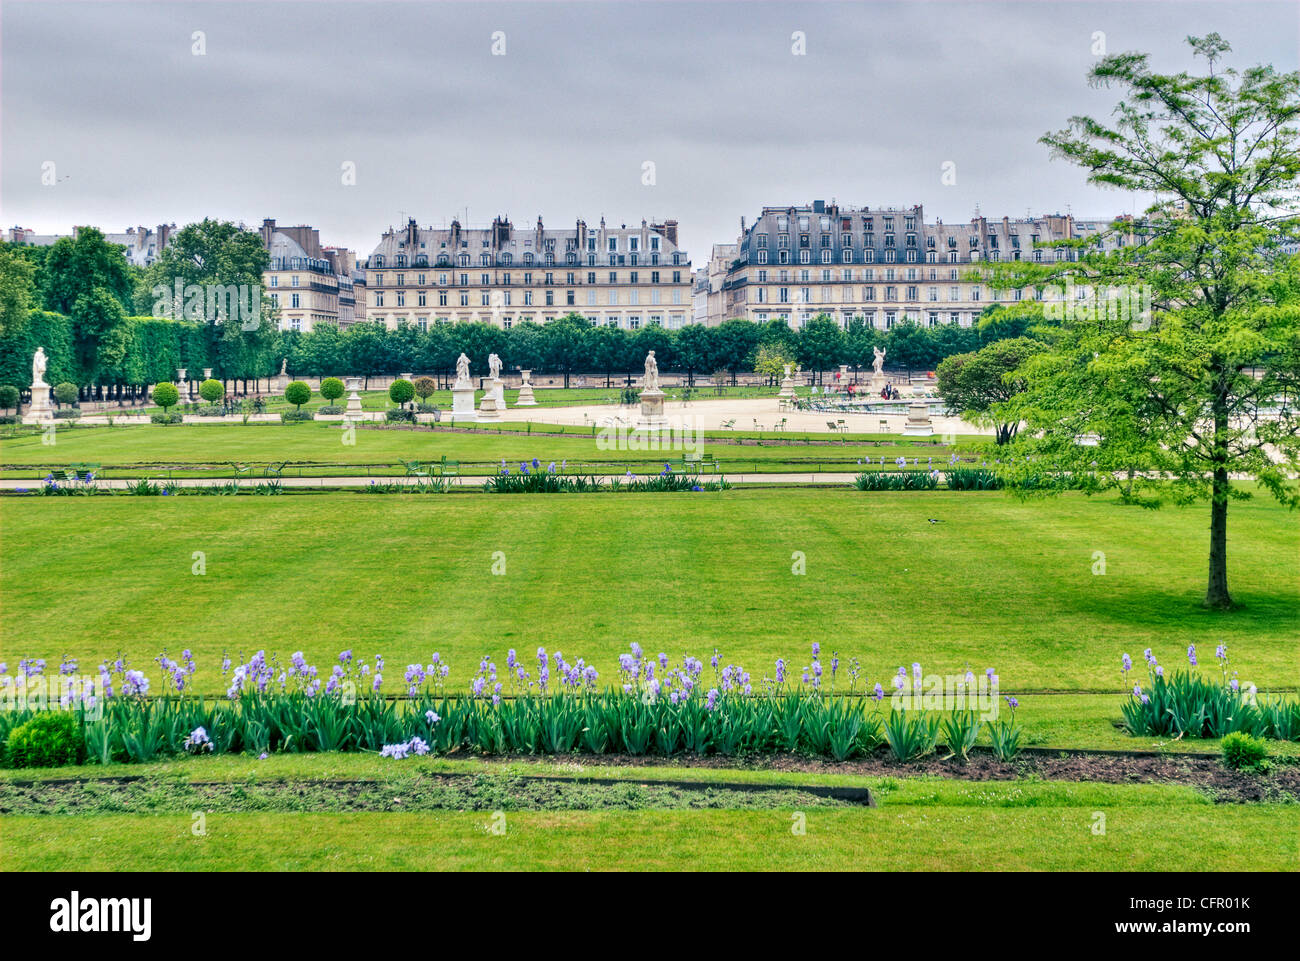 The Jardin des Tuileries, located between the Louvre and Place de la Concorde, is one of Paris's most visited gardens. Stock Photo